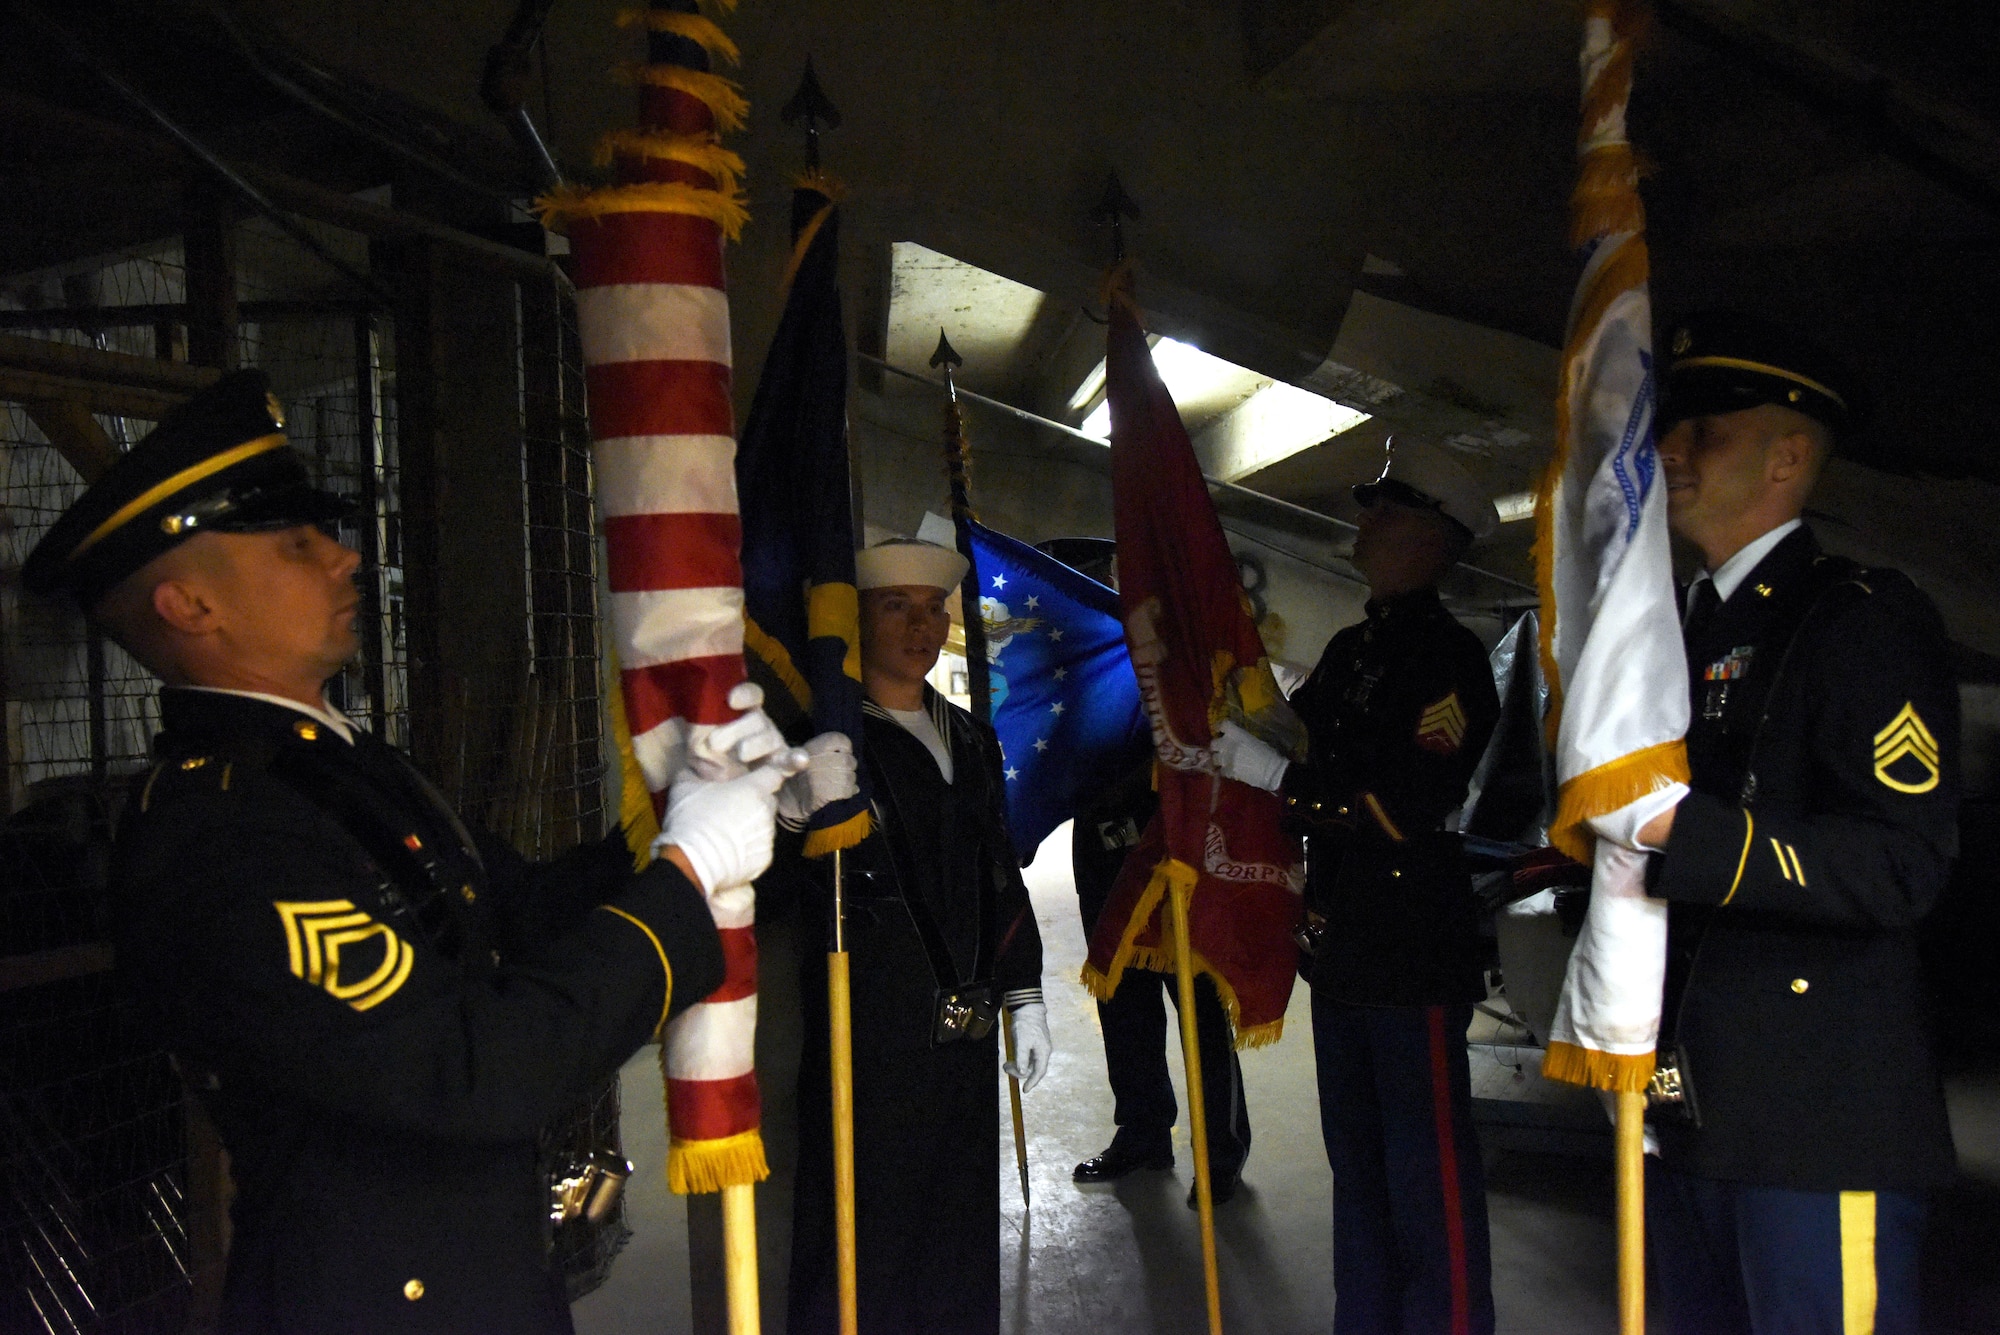 The Goodfellow Air Force Base Joint-Service Color Guard prepare to present the colors during the 85th Annual San Angelo Stock Show and Rodeo Military Appreciation Night at the Foster Communications Coliseum in San Angelo, Texas, Feb. 15, 2017. Goodfellow volunteers supported the rodeo by setting up pens, singing the national anthem and presenting the colors. (U.S. Air Force photo by Staff Sgt. Joshua Edwards/Released)